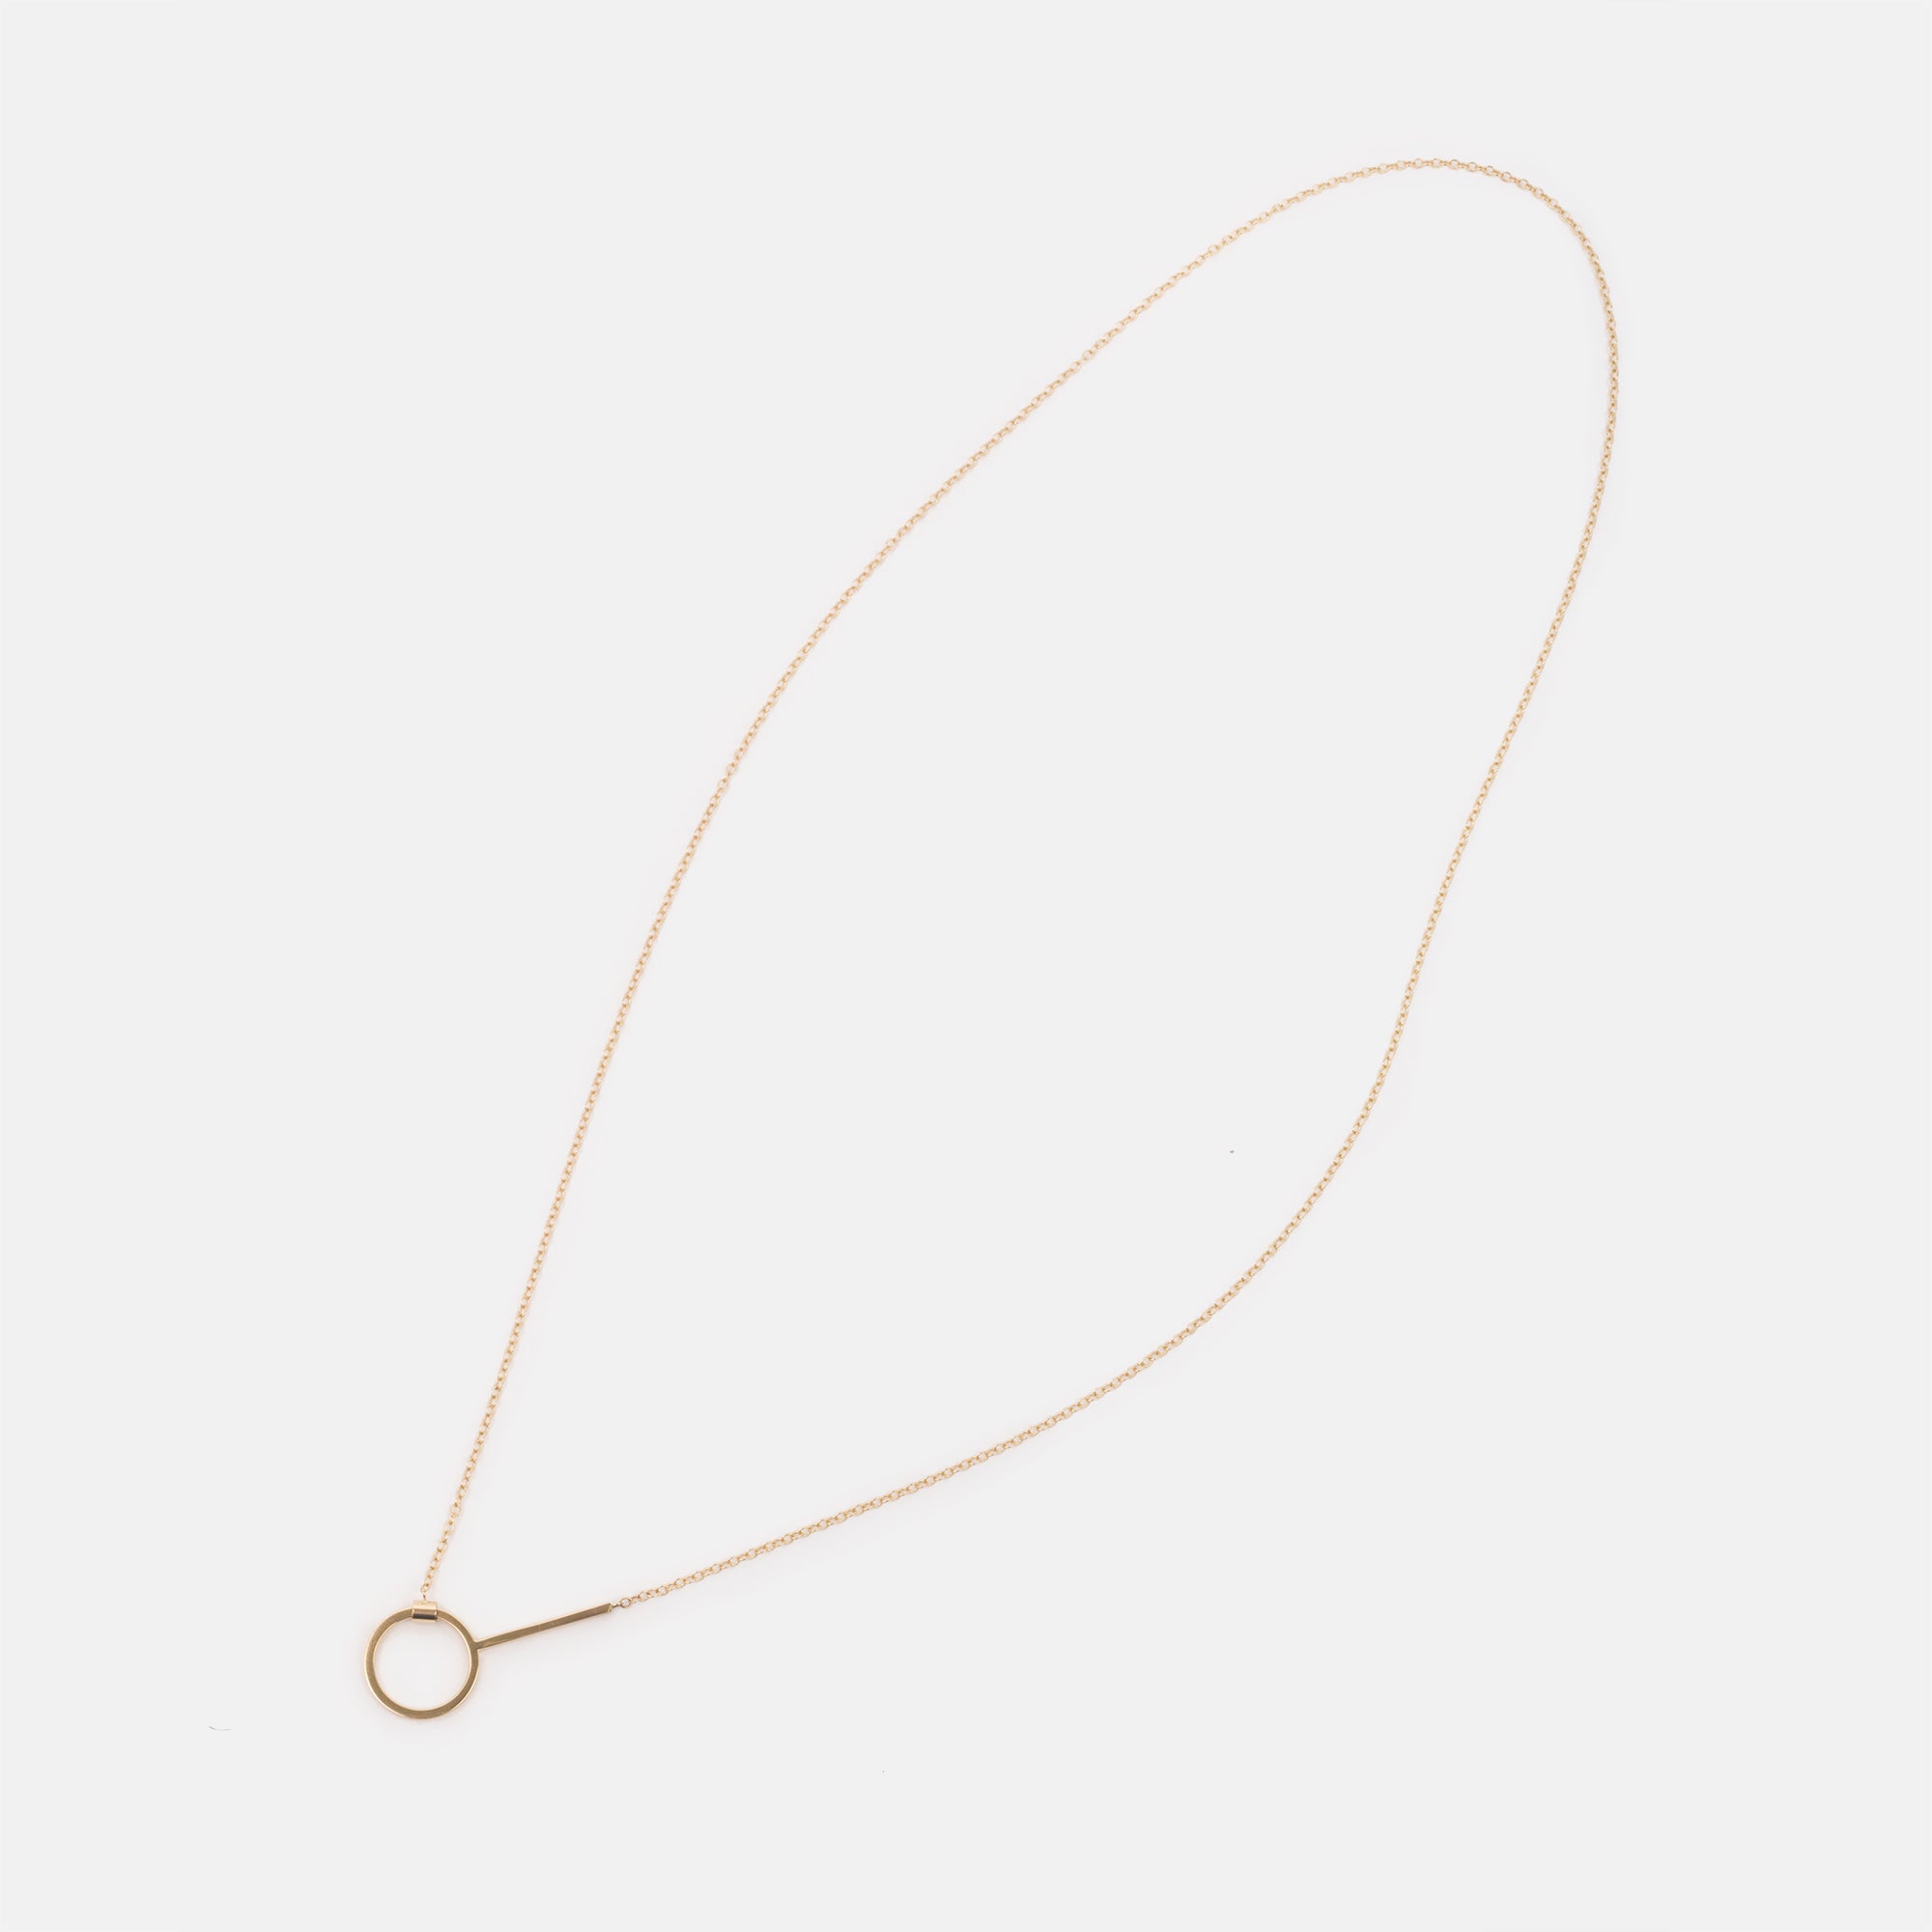 Diena Designer Necklace in 14k Gold By SHW Fine Jewelry NYC